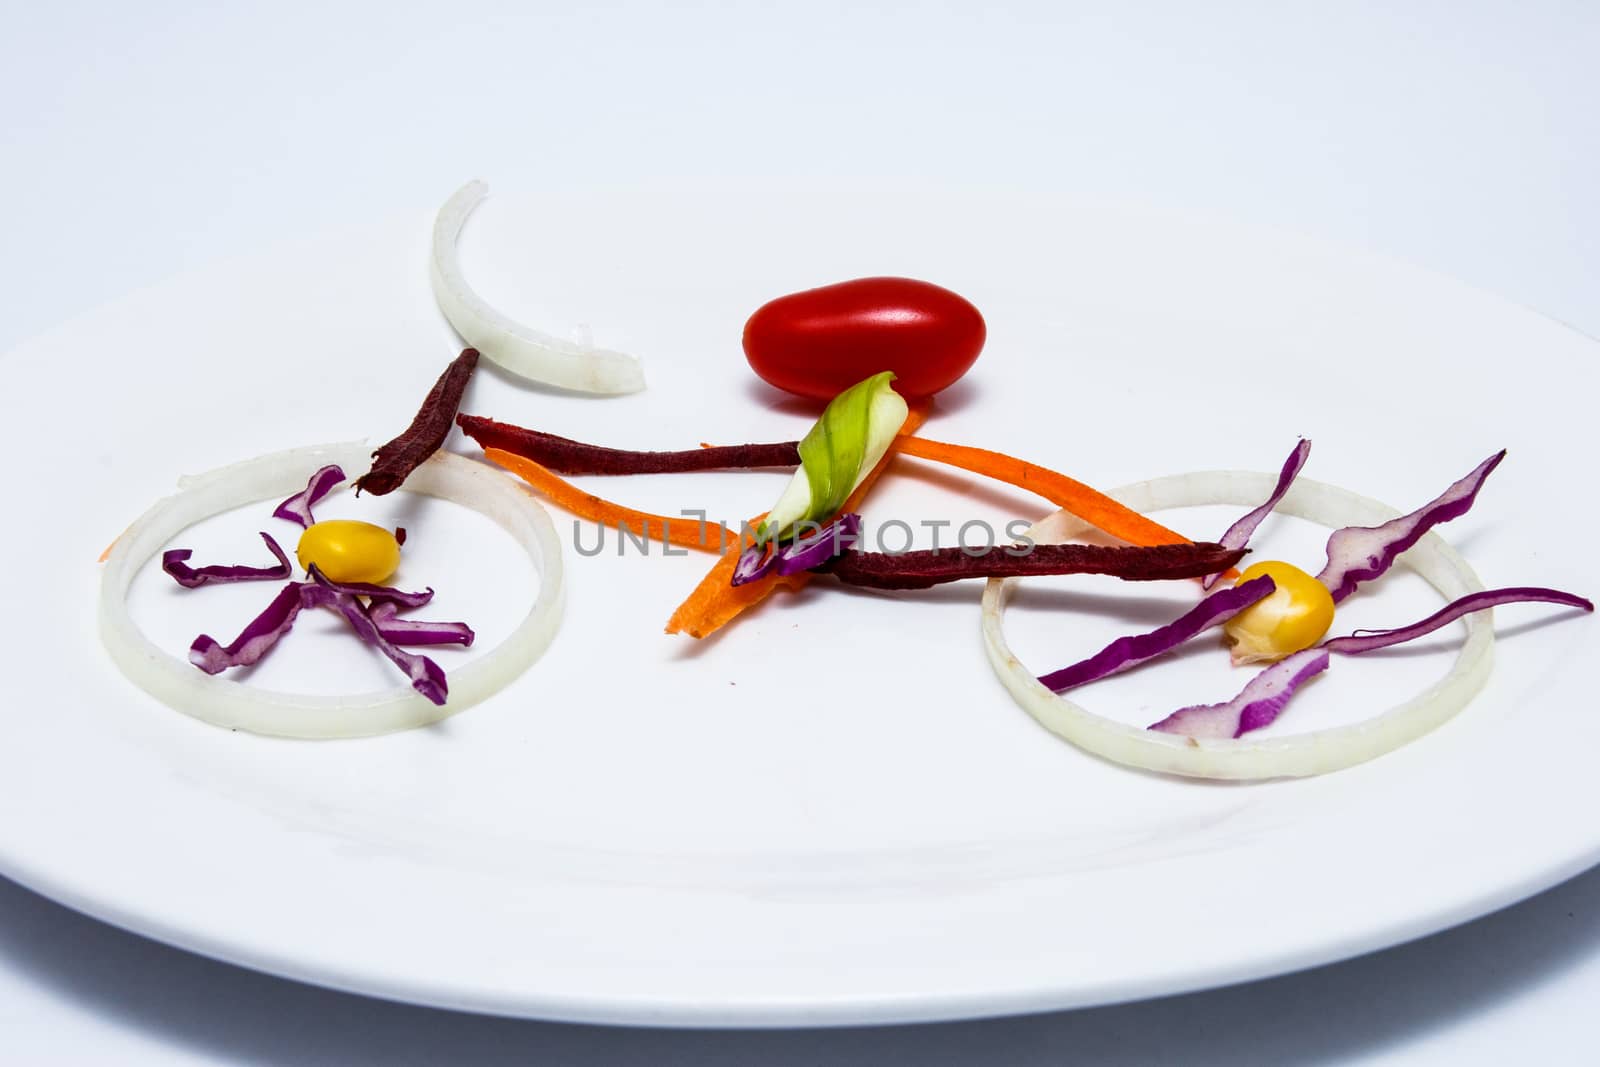 Sliced vegetables in form of a bicycle on dish